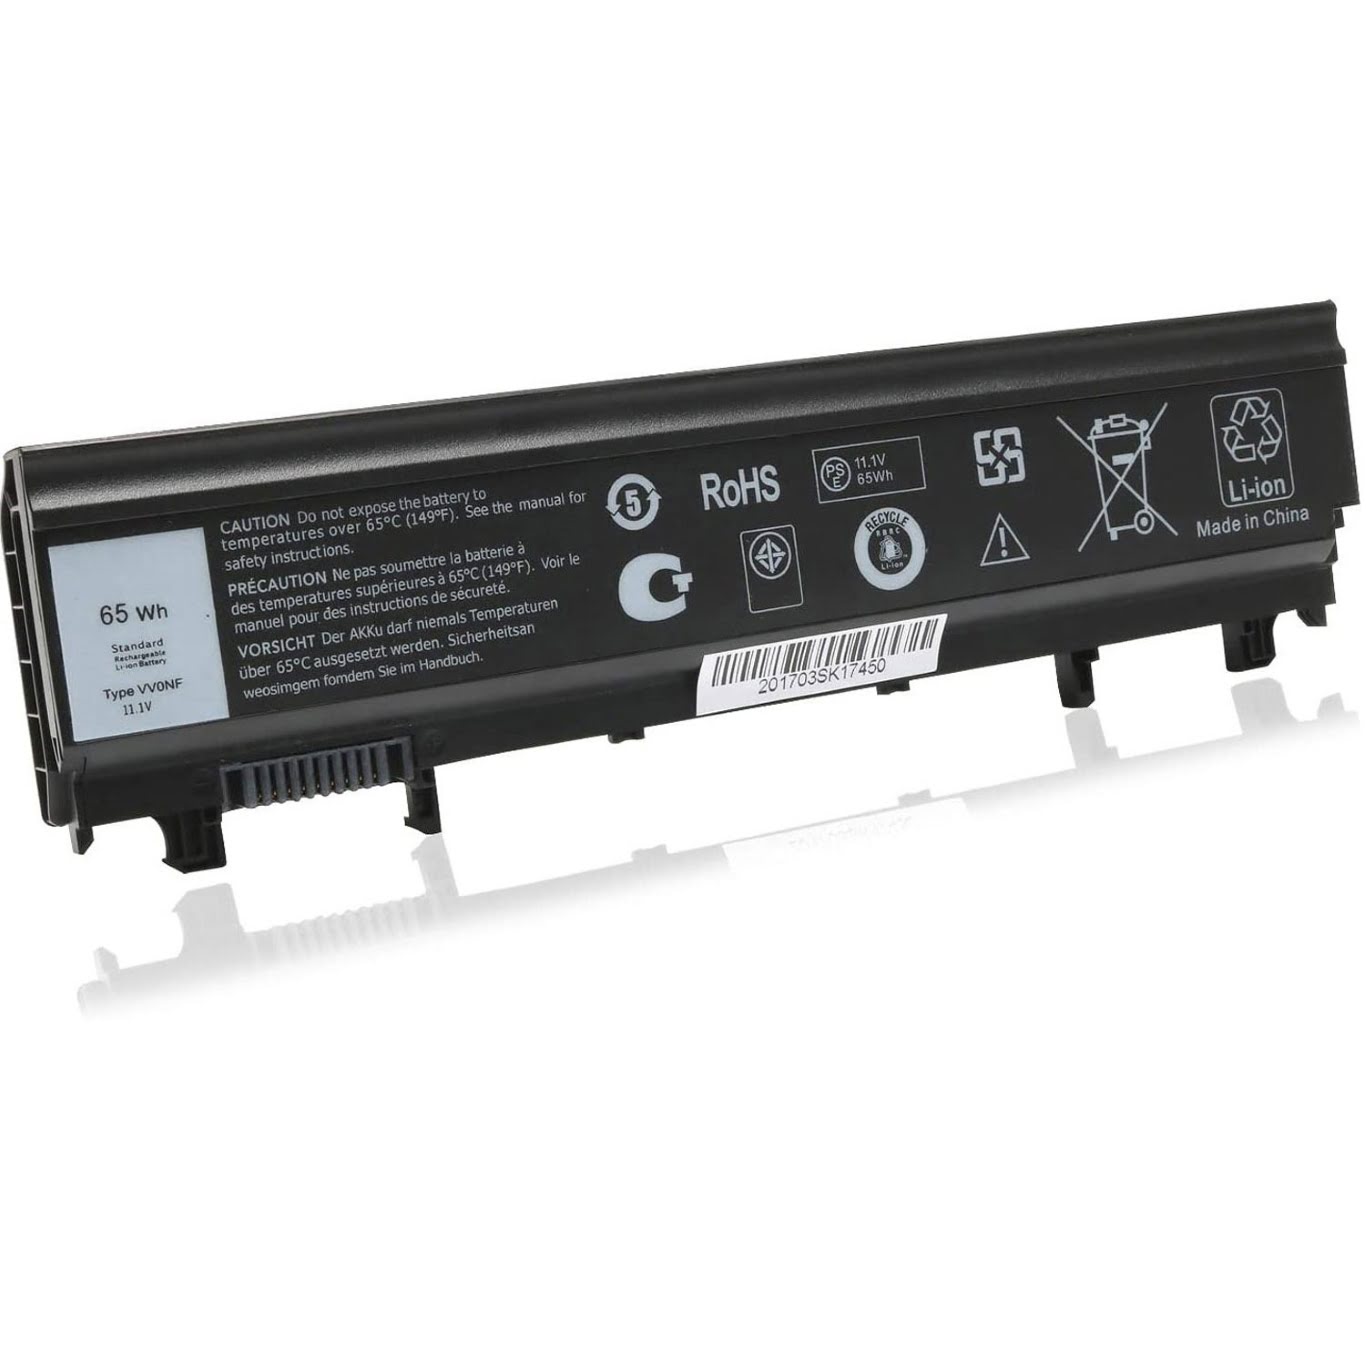 0K8HC, 1N9C0 replacement Laptop Battery for Dell Latitude E5440, Latitude E5540, 11.1V, 65wh, 6 cells